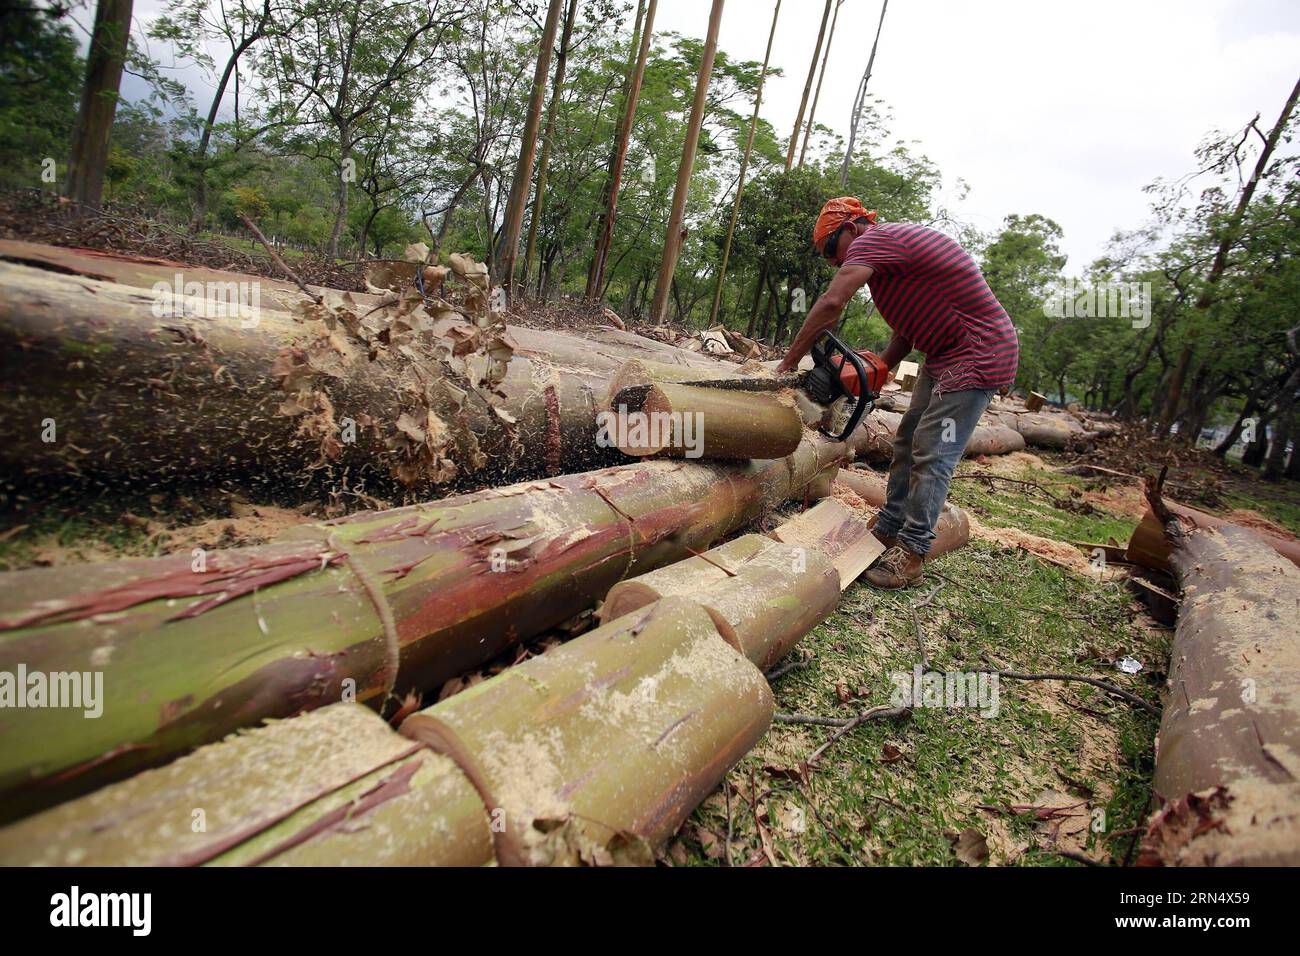 SAN JOSE, June 2, 2015 -- A municipal employee fells eucalyptus trees, not native species of Costa Rica, in La Sabana Park, in San Jose, Costa Rica, on June 2, 2015. The project of the National Institute of Biodiversity seeks to sow about 2,600 trees of 178 native species, such as how ceiba, candelillo, ron ron, ojochillo, nazareno and guayacan real, in order to attract to 130 species of birds and insects. Kent Gilbert) COSTA RICA-SAN JOSE-ENVIRONMENT-BIODIVERSITY e KENTxGILBERT PUBLICATIONxNOTxINxCHN   San Jose June 2 2015 a Municipal Employee Fells Eucalyptus Trees Not NATIVE Species of Cost Stock Photo